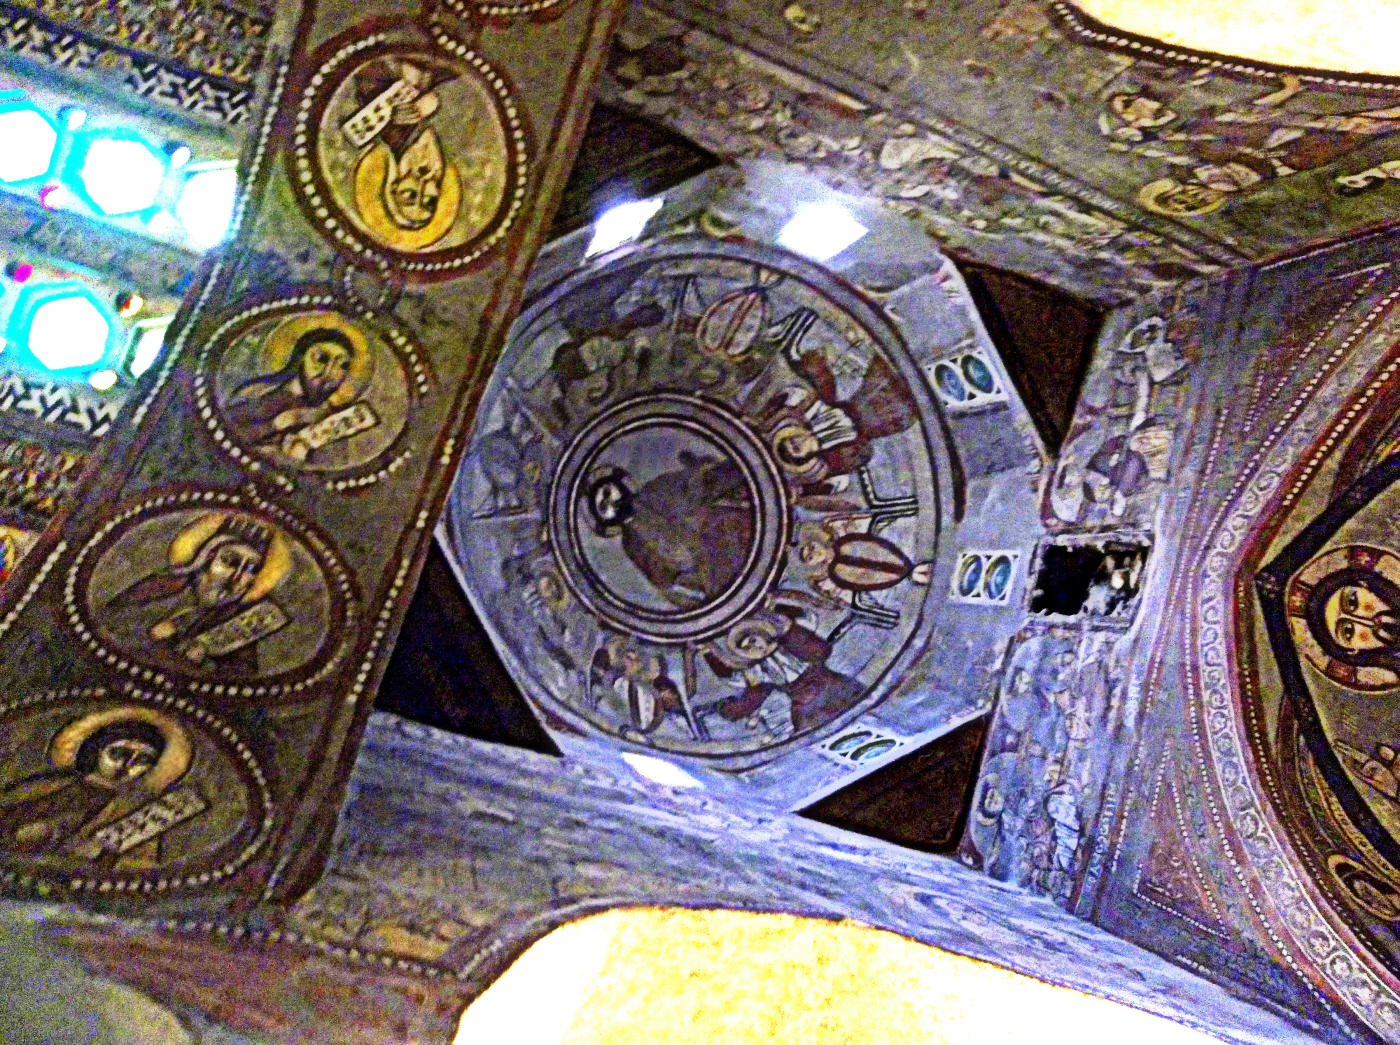 Very Dark Ceiling (Lightened Post Production) at St. Anthony (the Anchorite, of Thebes 251 - 356 AD) Monastery - Egypt